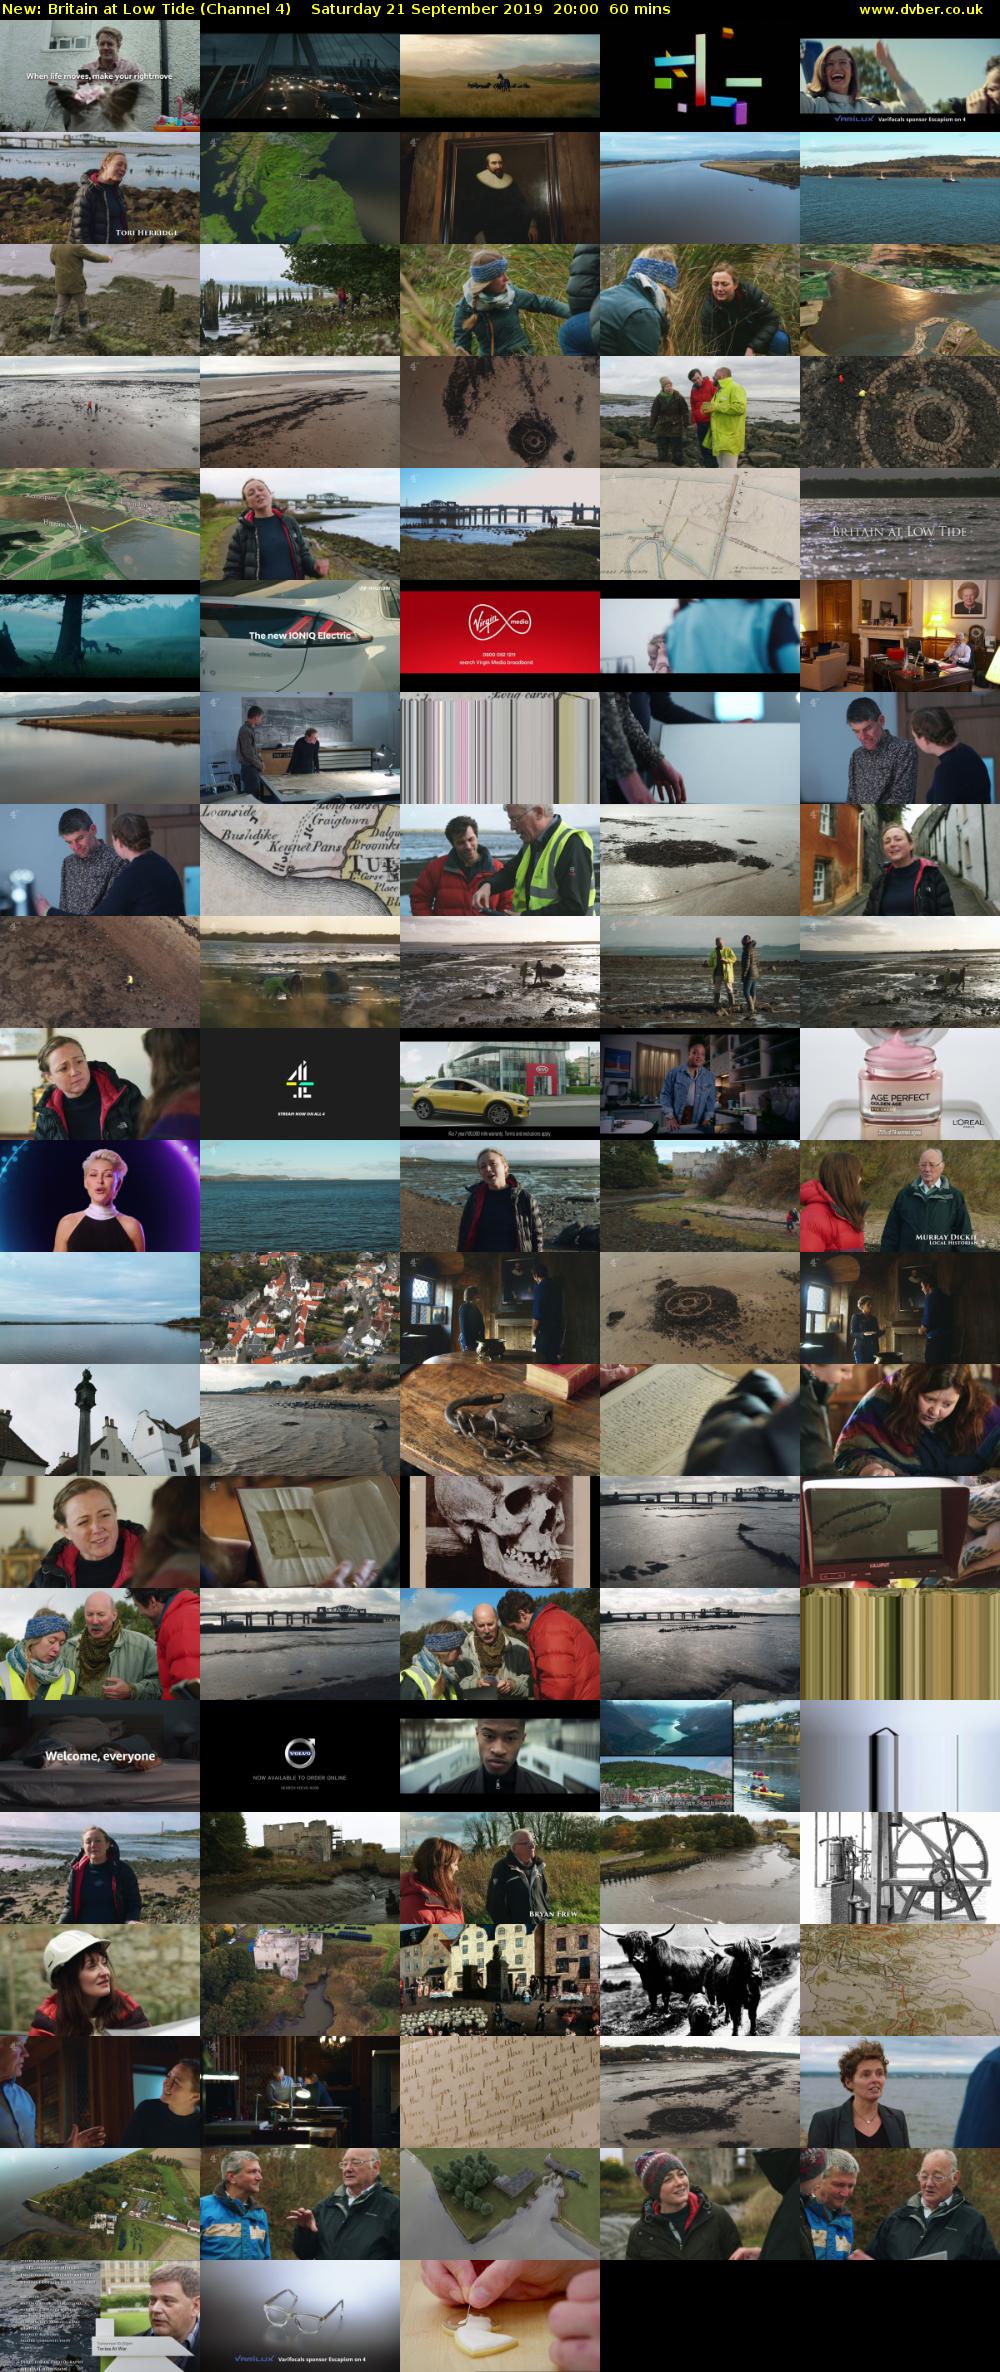 Britain at Low Tide (Channel 4) Saturday 21 September 2019 20:00 - 21:00